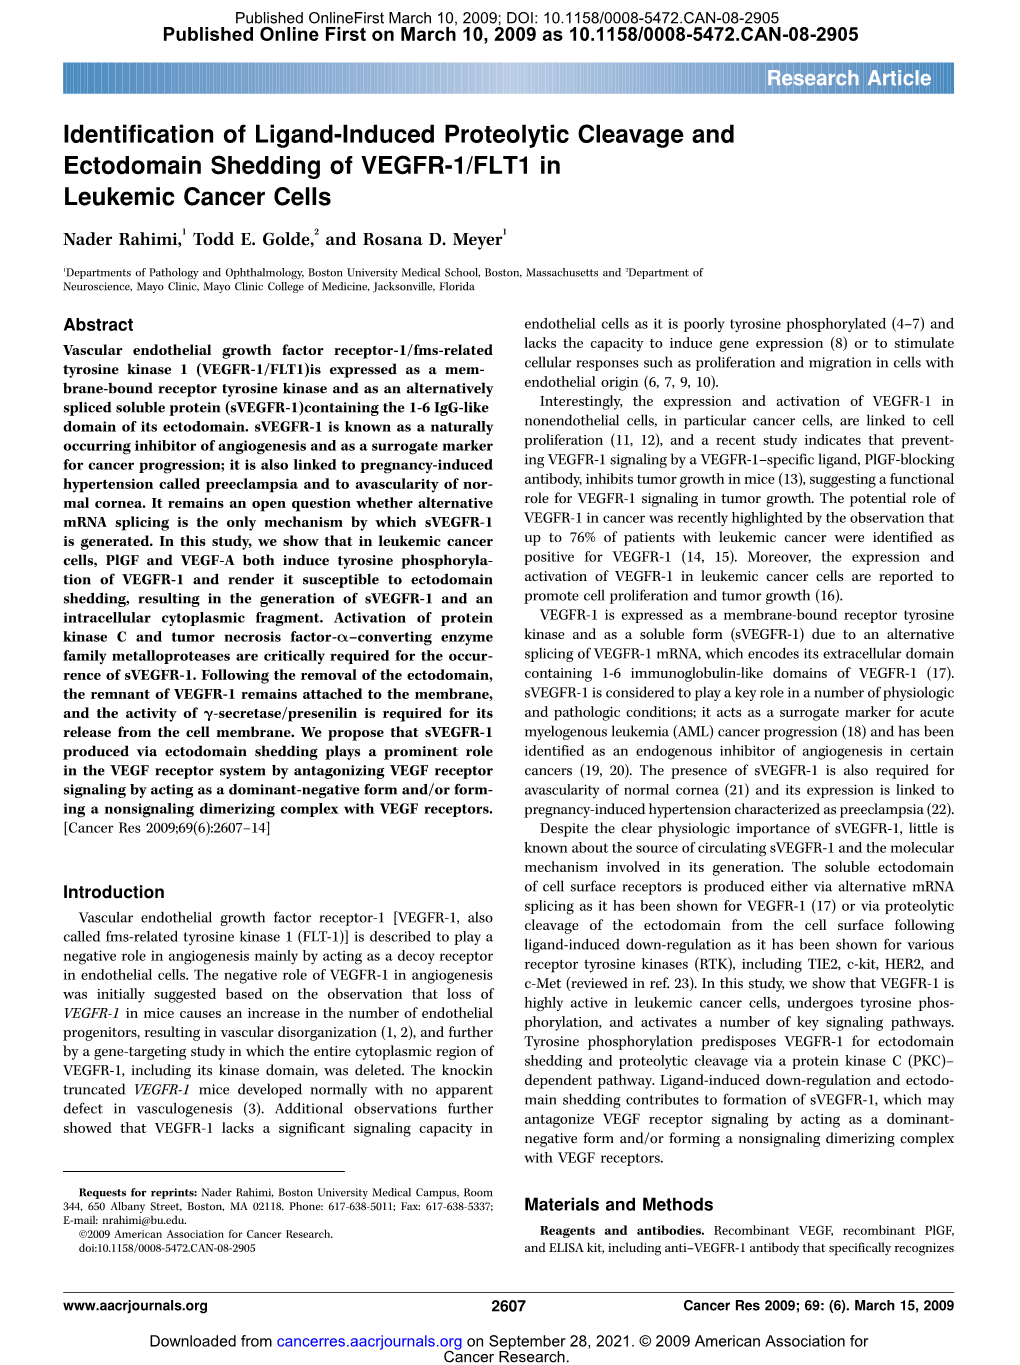 Identification of Ligand-Induced Proteolytic Cleavage and Ectodomain Shedding of VEGFR-1/FLT1 in Leukemic Cancer Cells Nader Rahimi,1 Todd E